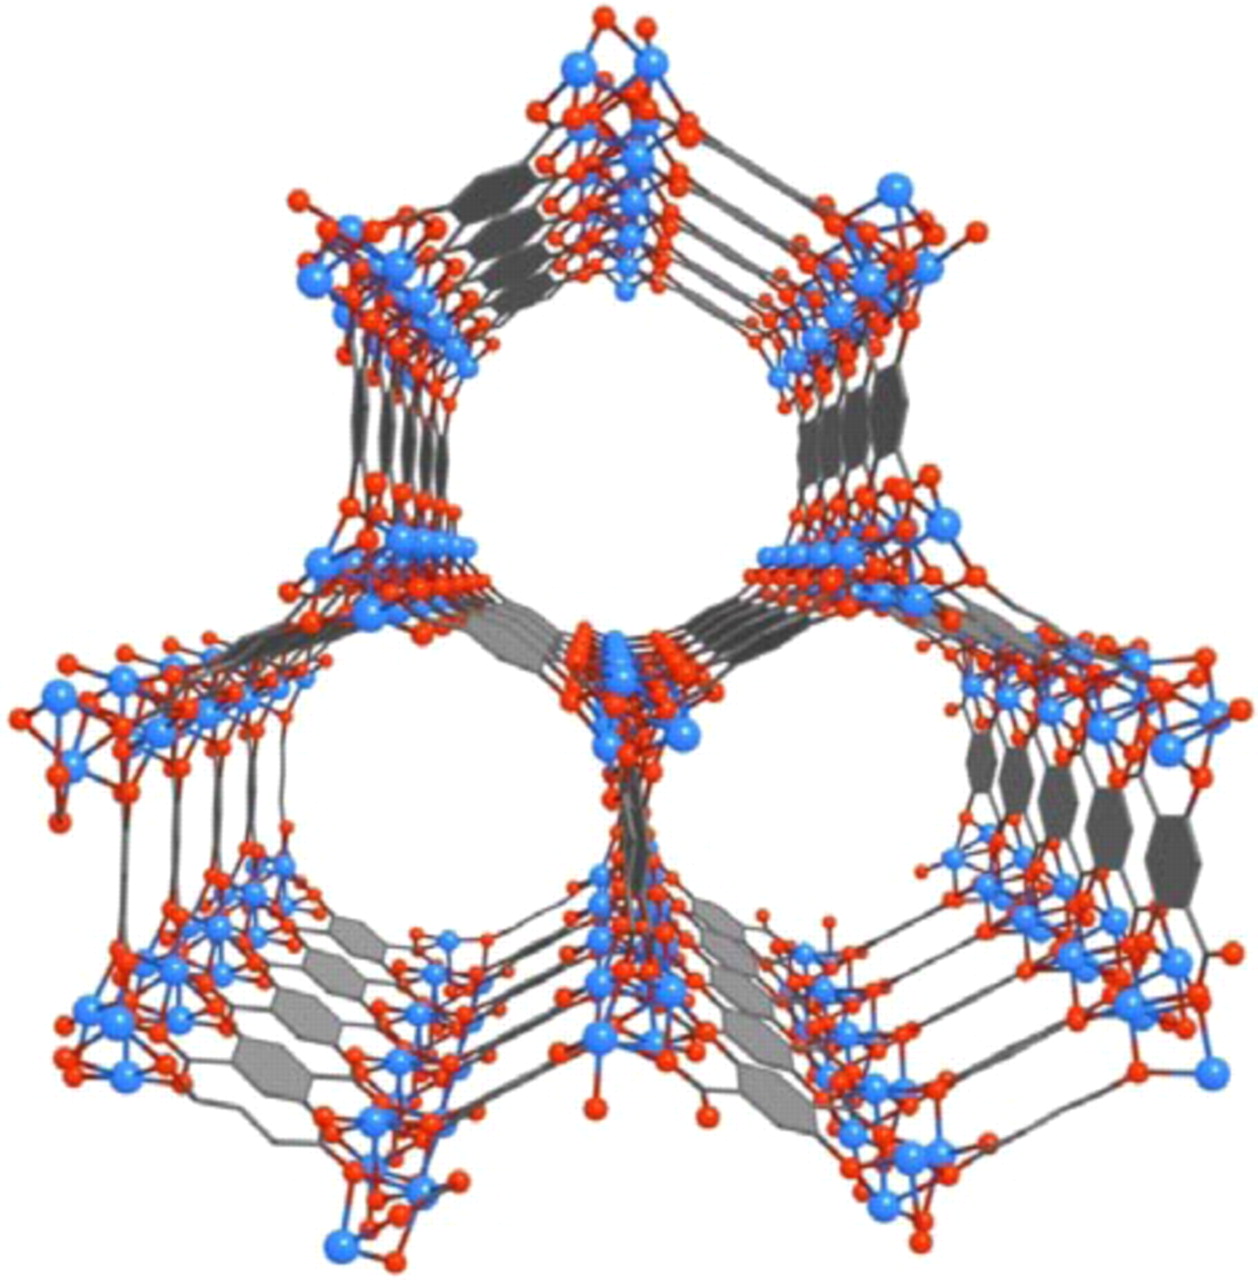 An inside look at metal-organic framework in action